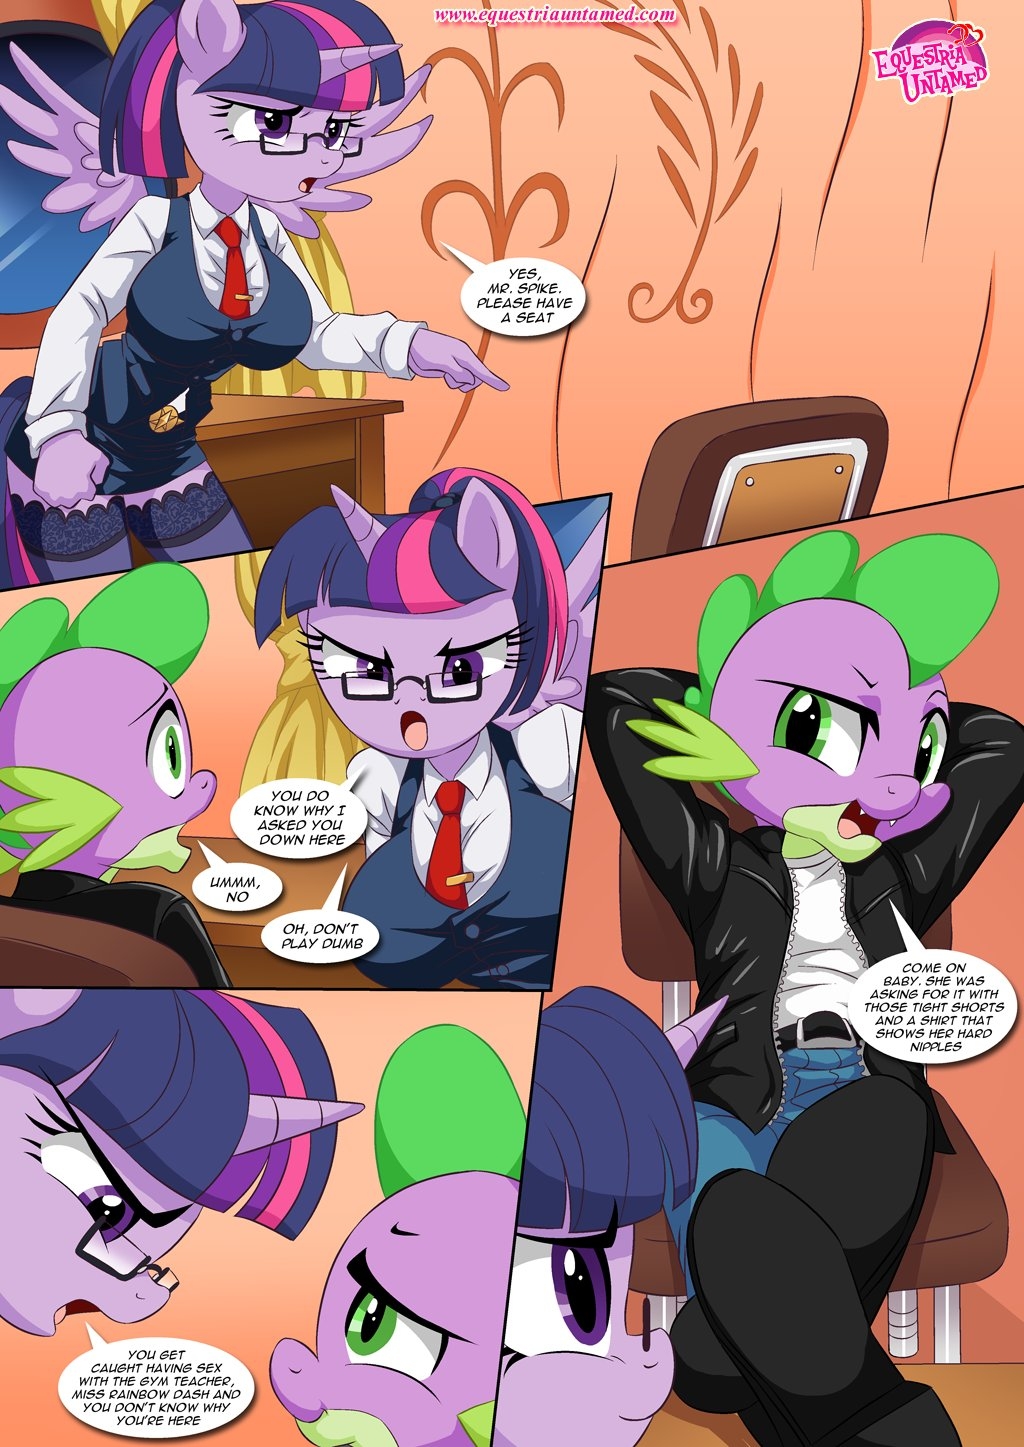 [Palcomix] Sex Ed with Miss Twilight Sparkle (My Little Pony Friendship is Magic) 16